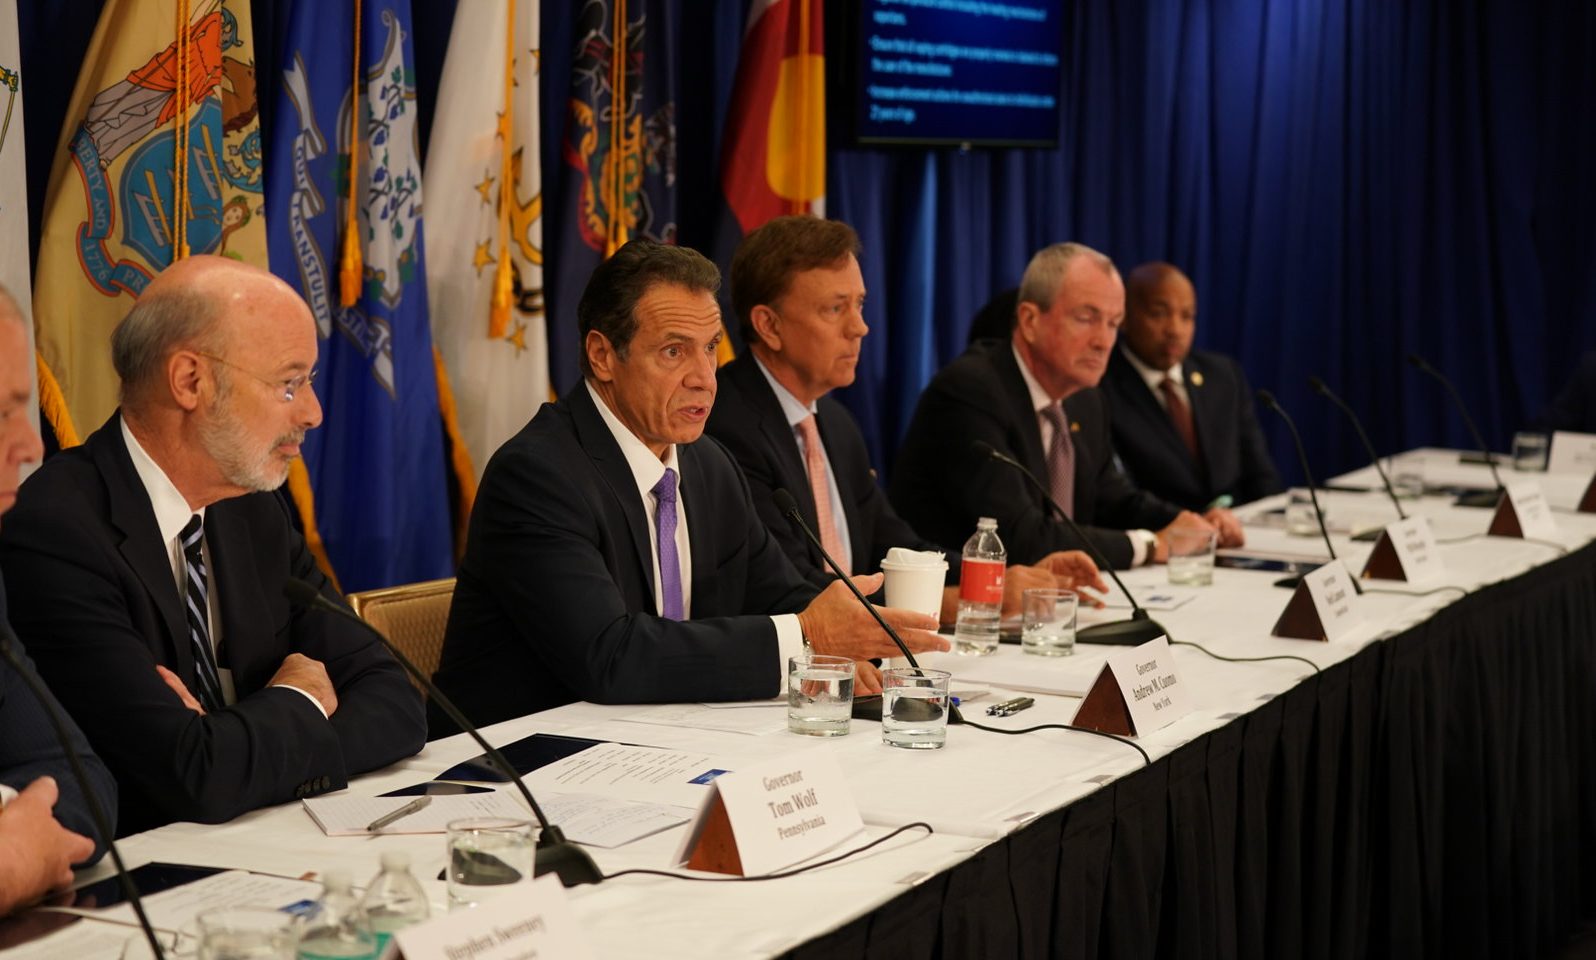 photo of Governors Of Four Northeastern States Hold Summit To Coordinate Marijuana Legalization Plans image